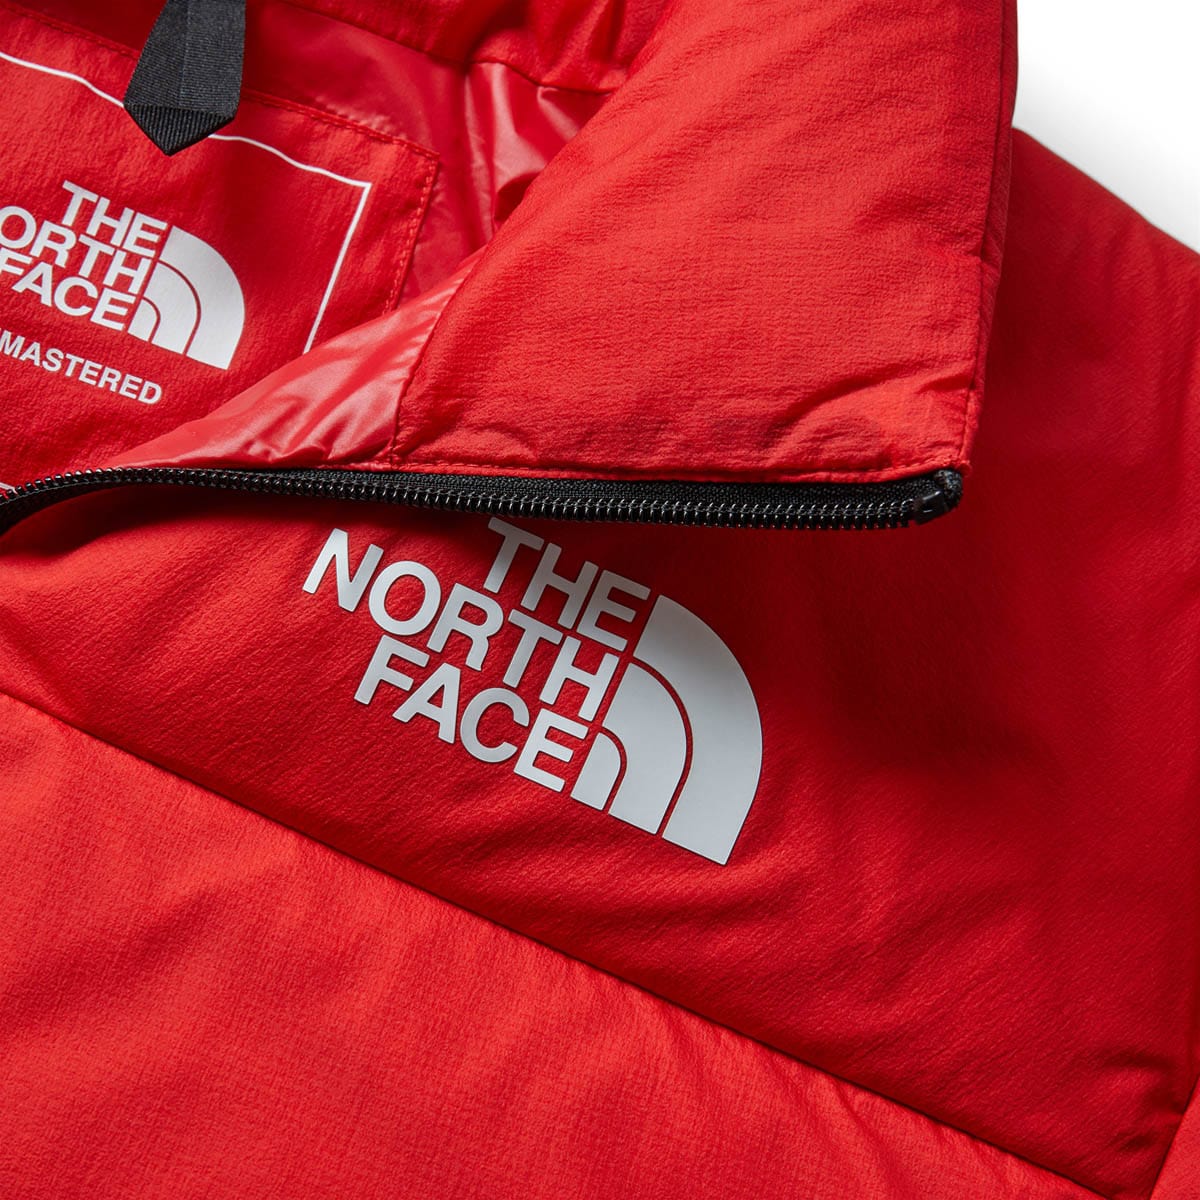 The North Face Outerwear RMST NUPTSE JACKET